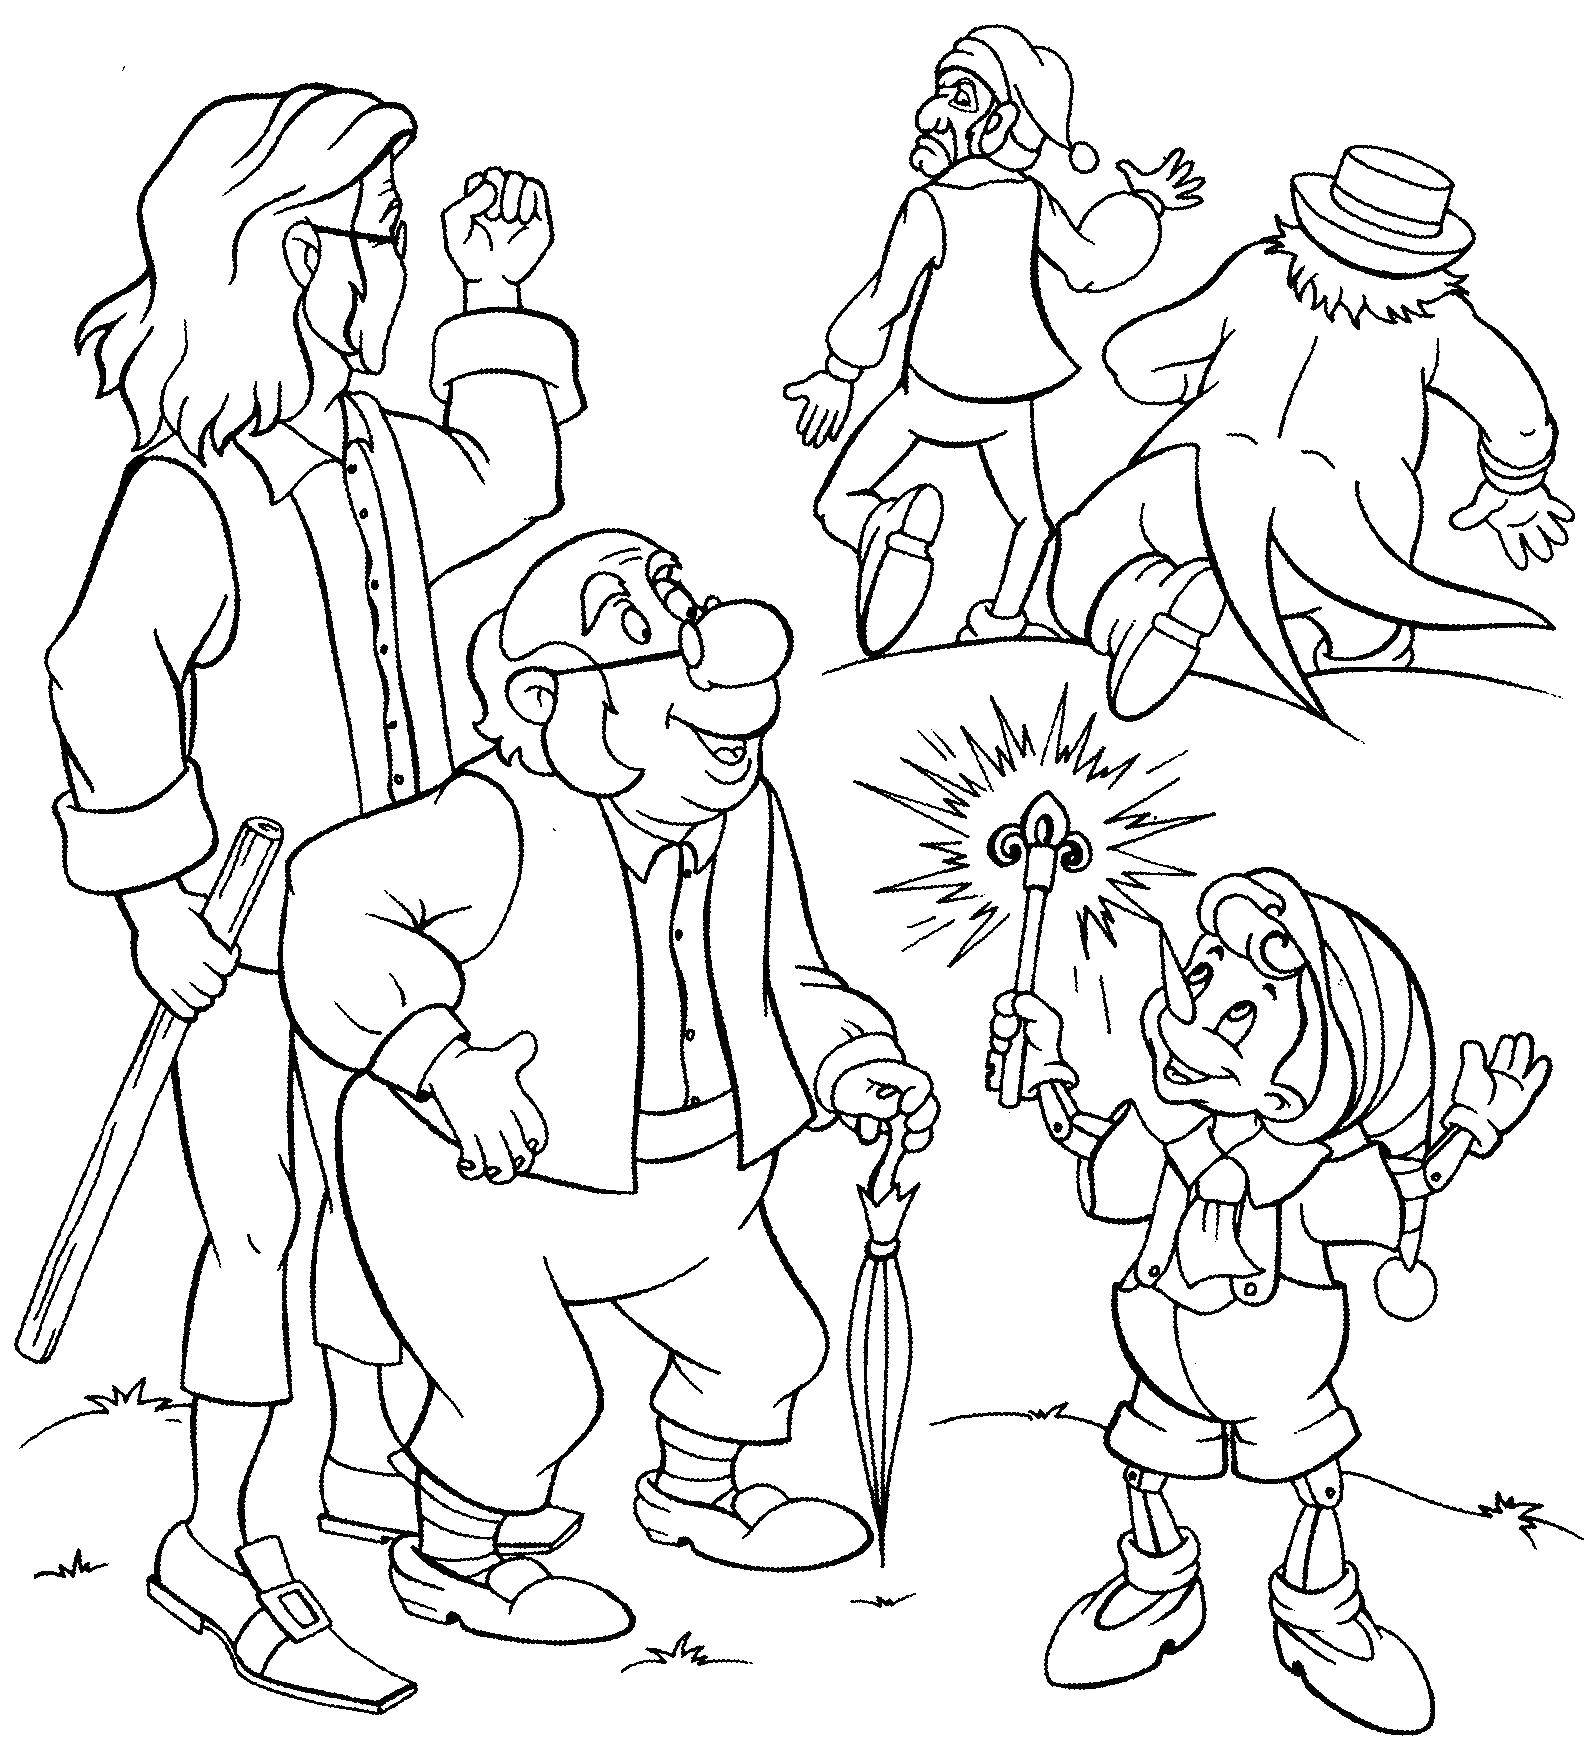 Coloring Characters the Golden key. Category cartoons. Tags:  Golden key, cartoons, Pinocchio.